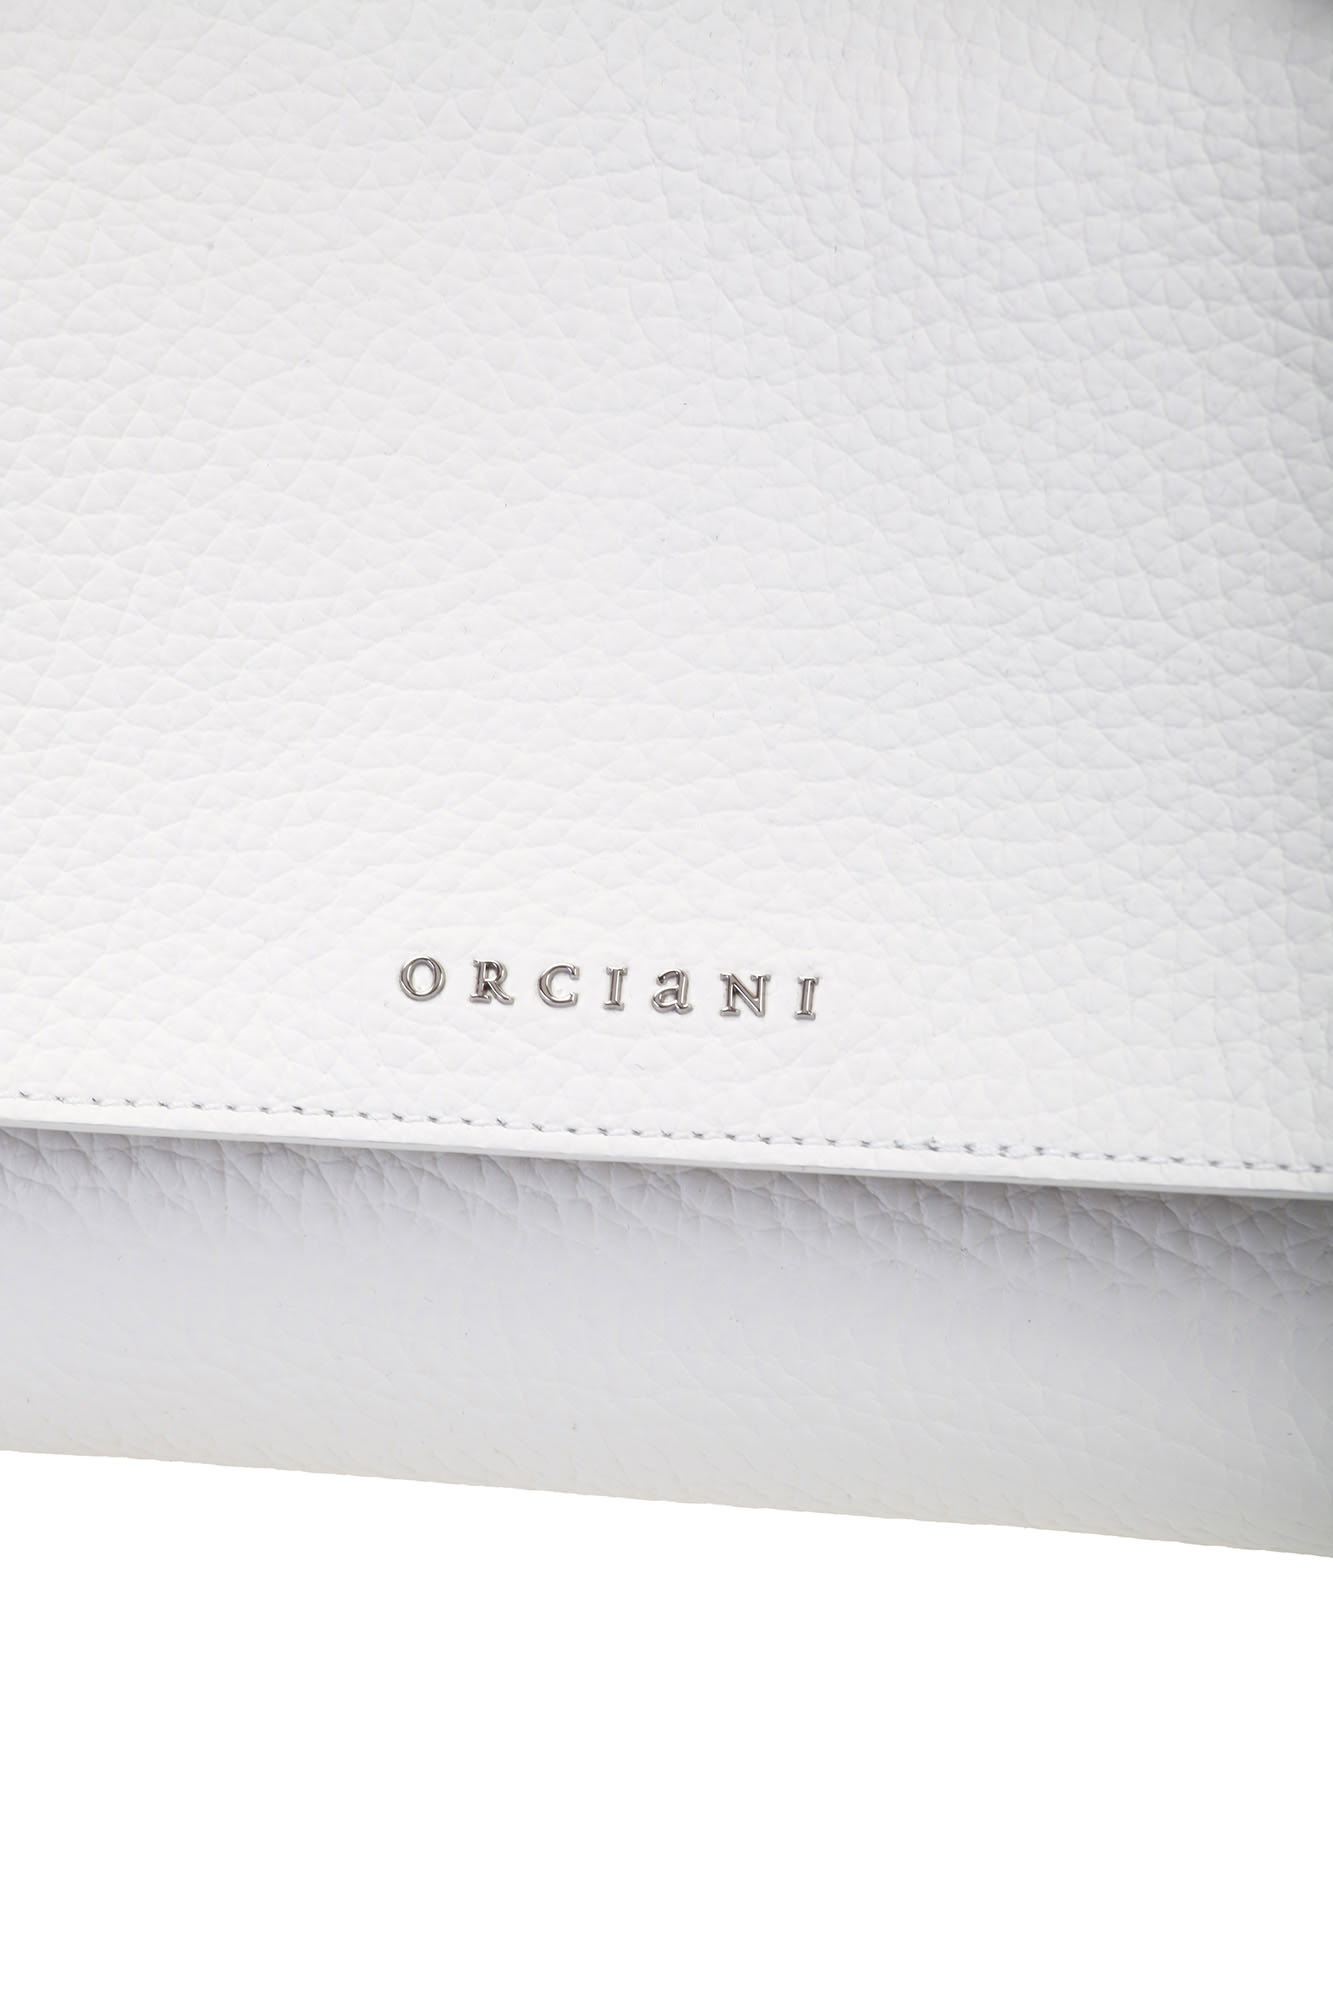 Shop Orciani Bags.. White